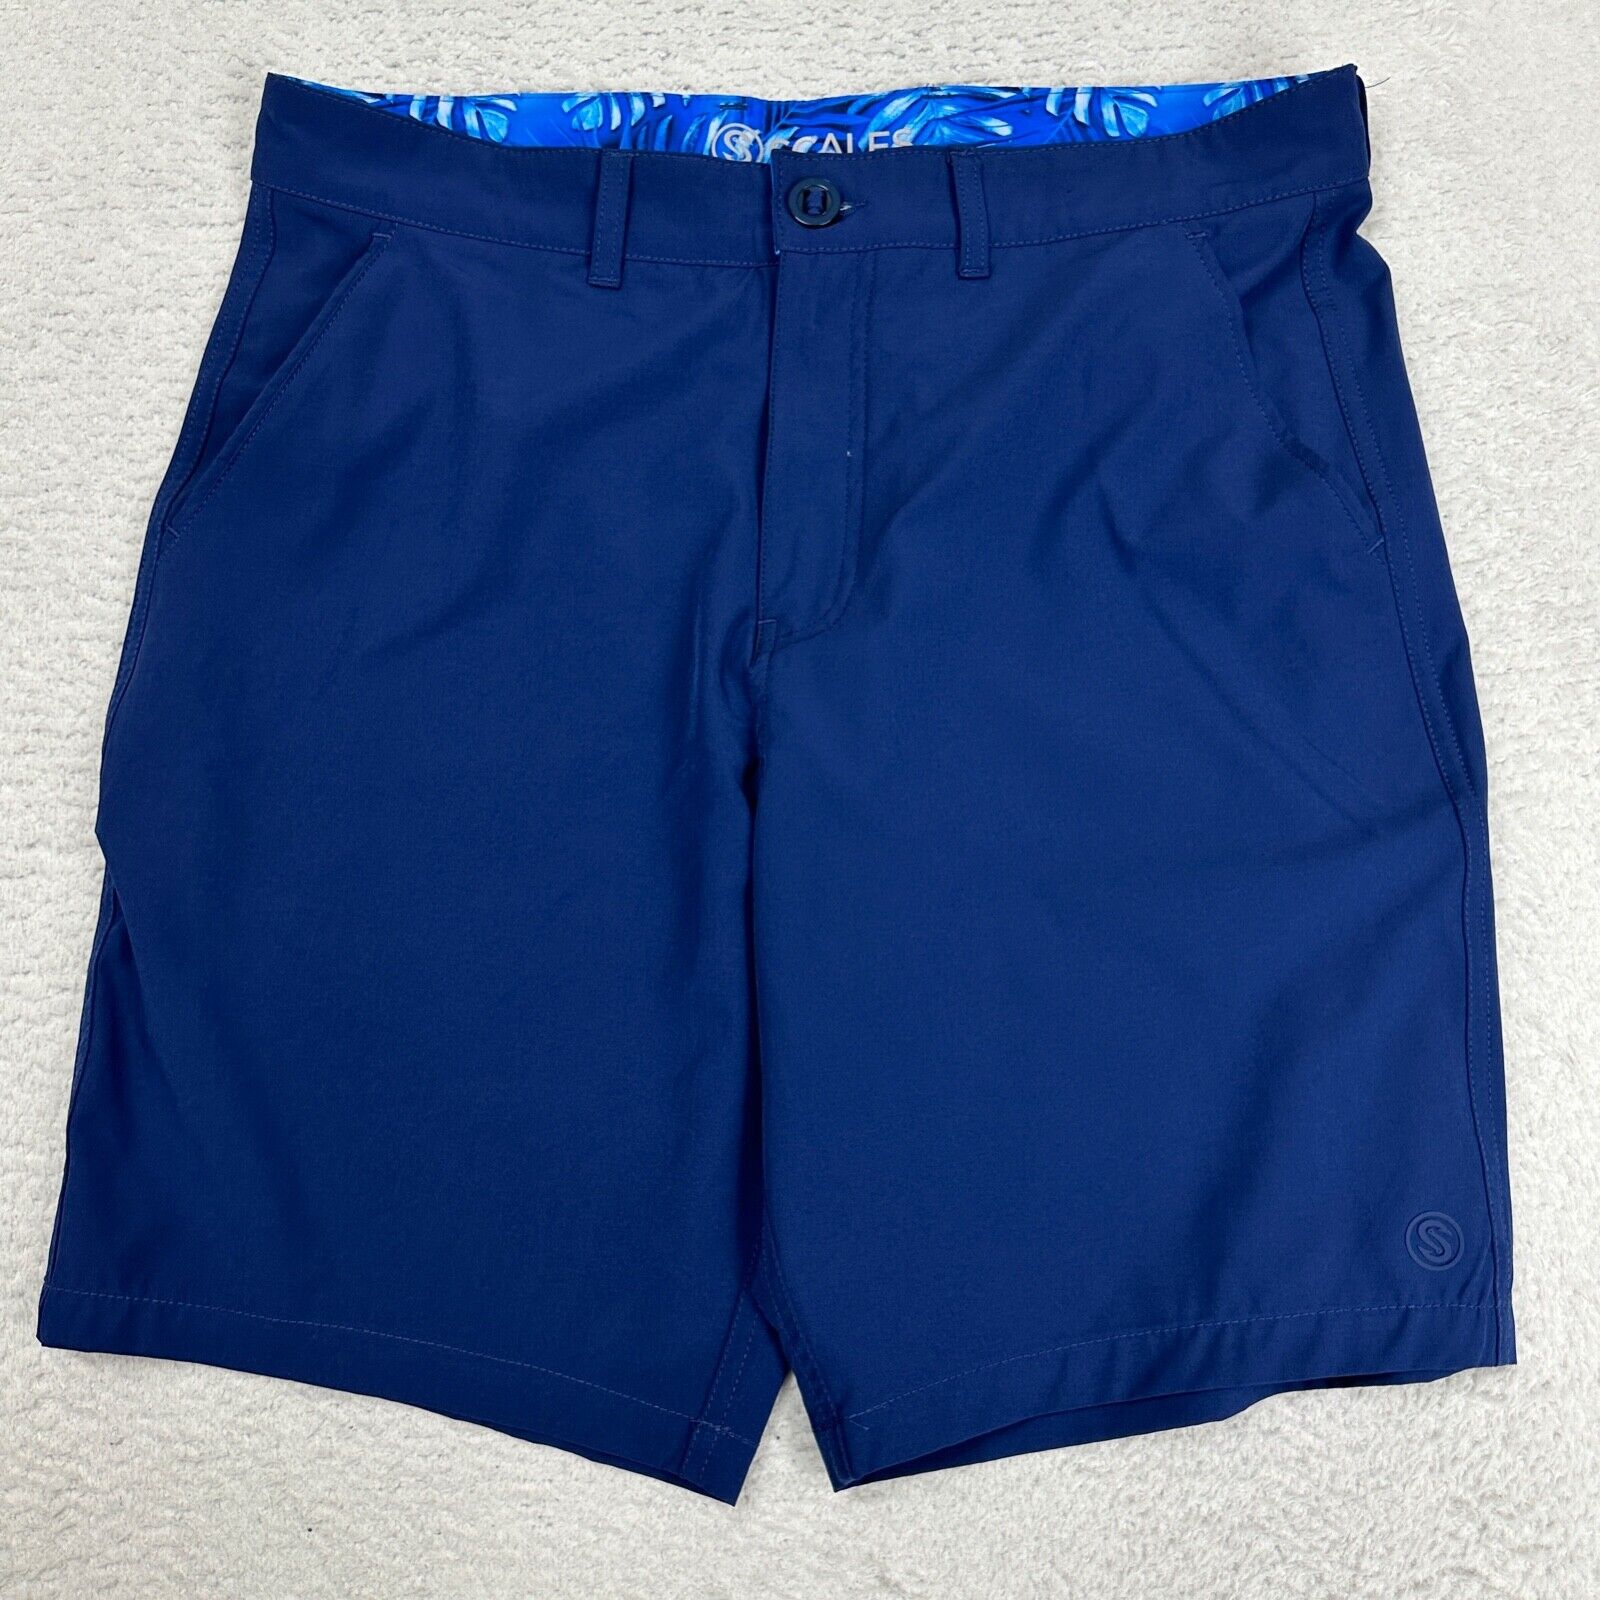 SCALES Fishing Shorts Men Size 32 (ACTUAL SIZE 33) Blue Performance Hybrid